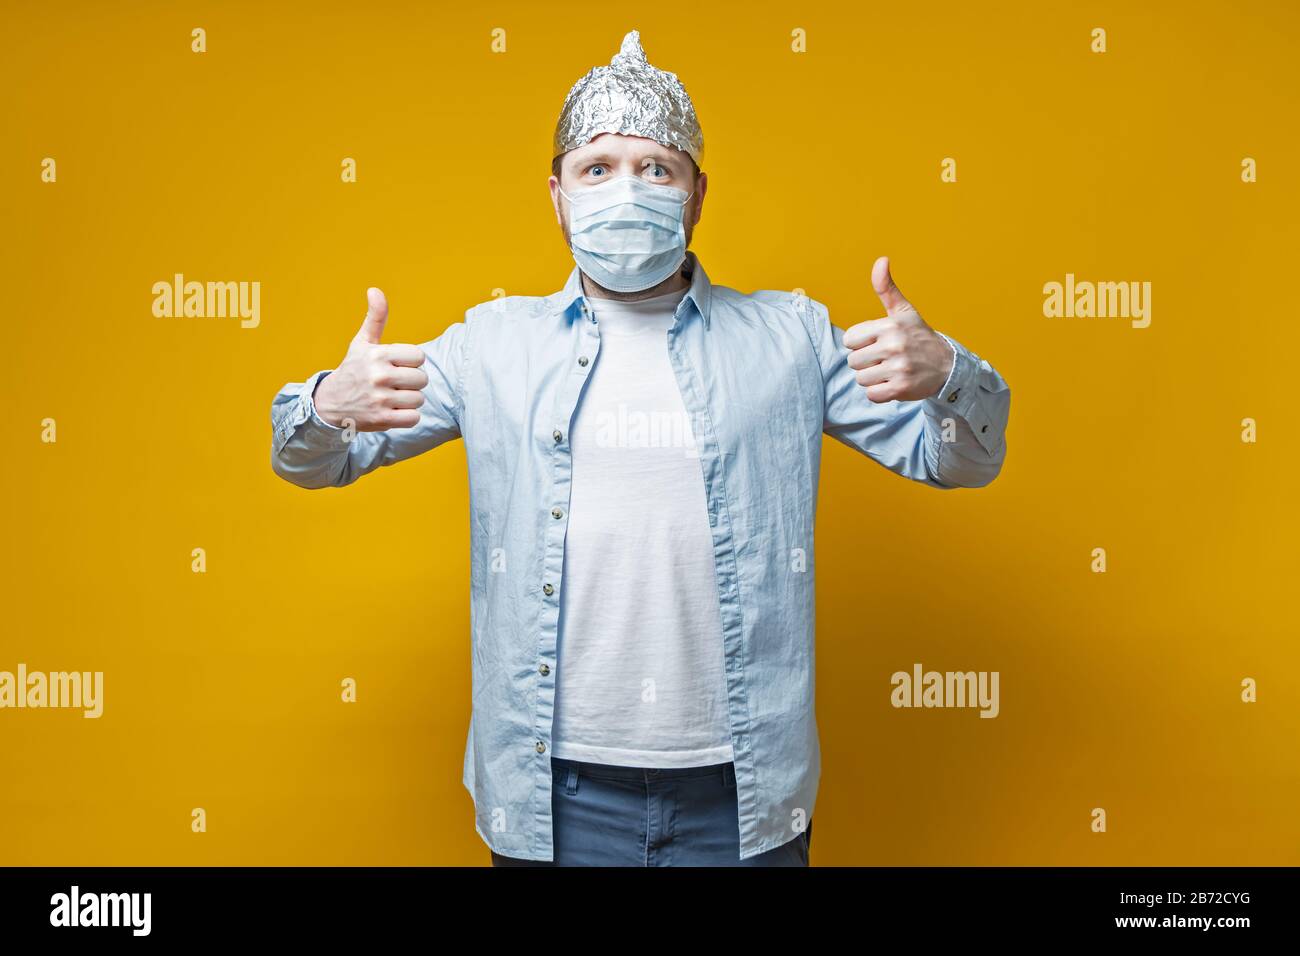 Man protected himself from the virus, put on a medical mask and a tin foil hat, he makes a thumbs up gesture and looks joyfully. Stock Photo